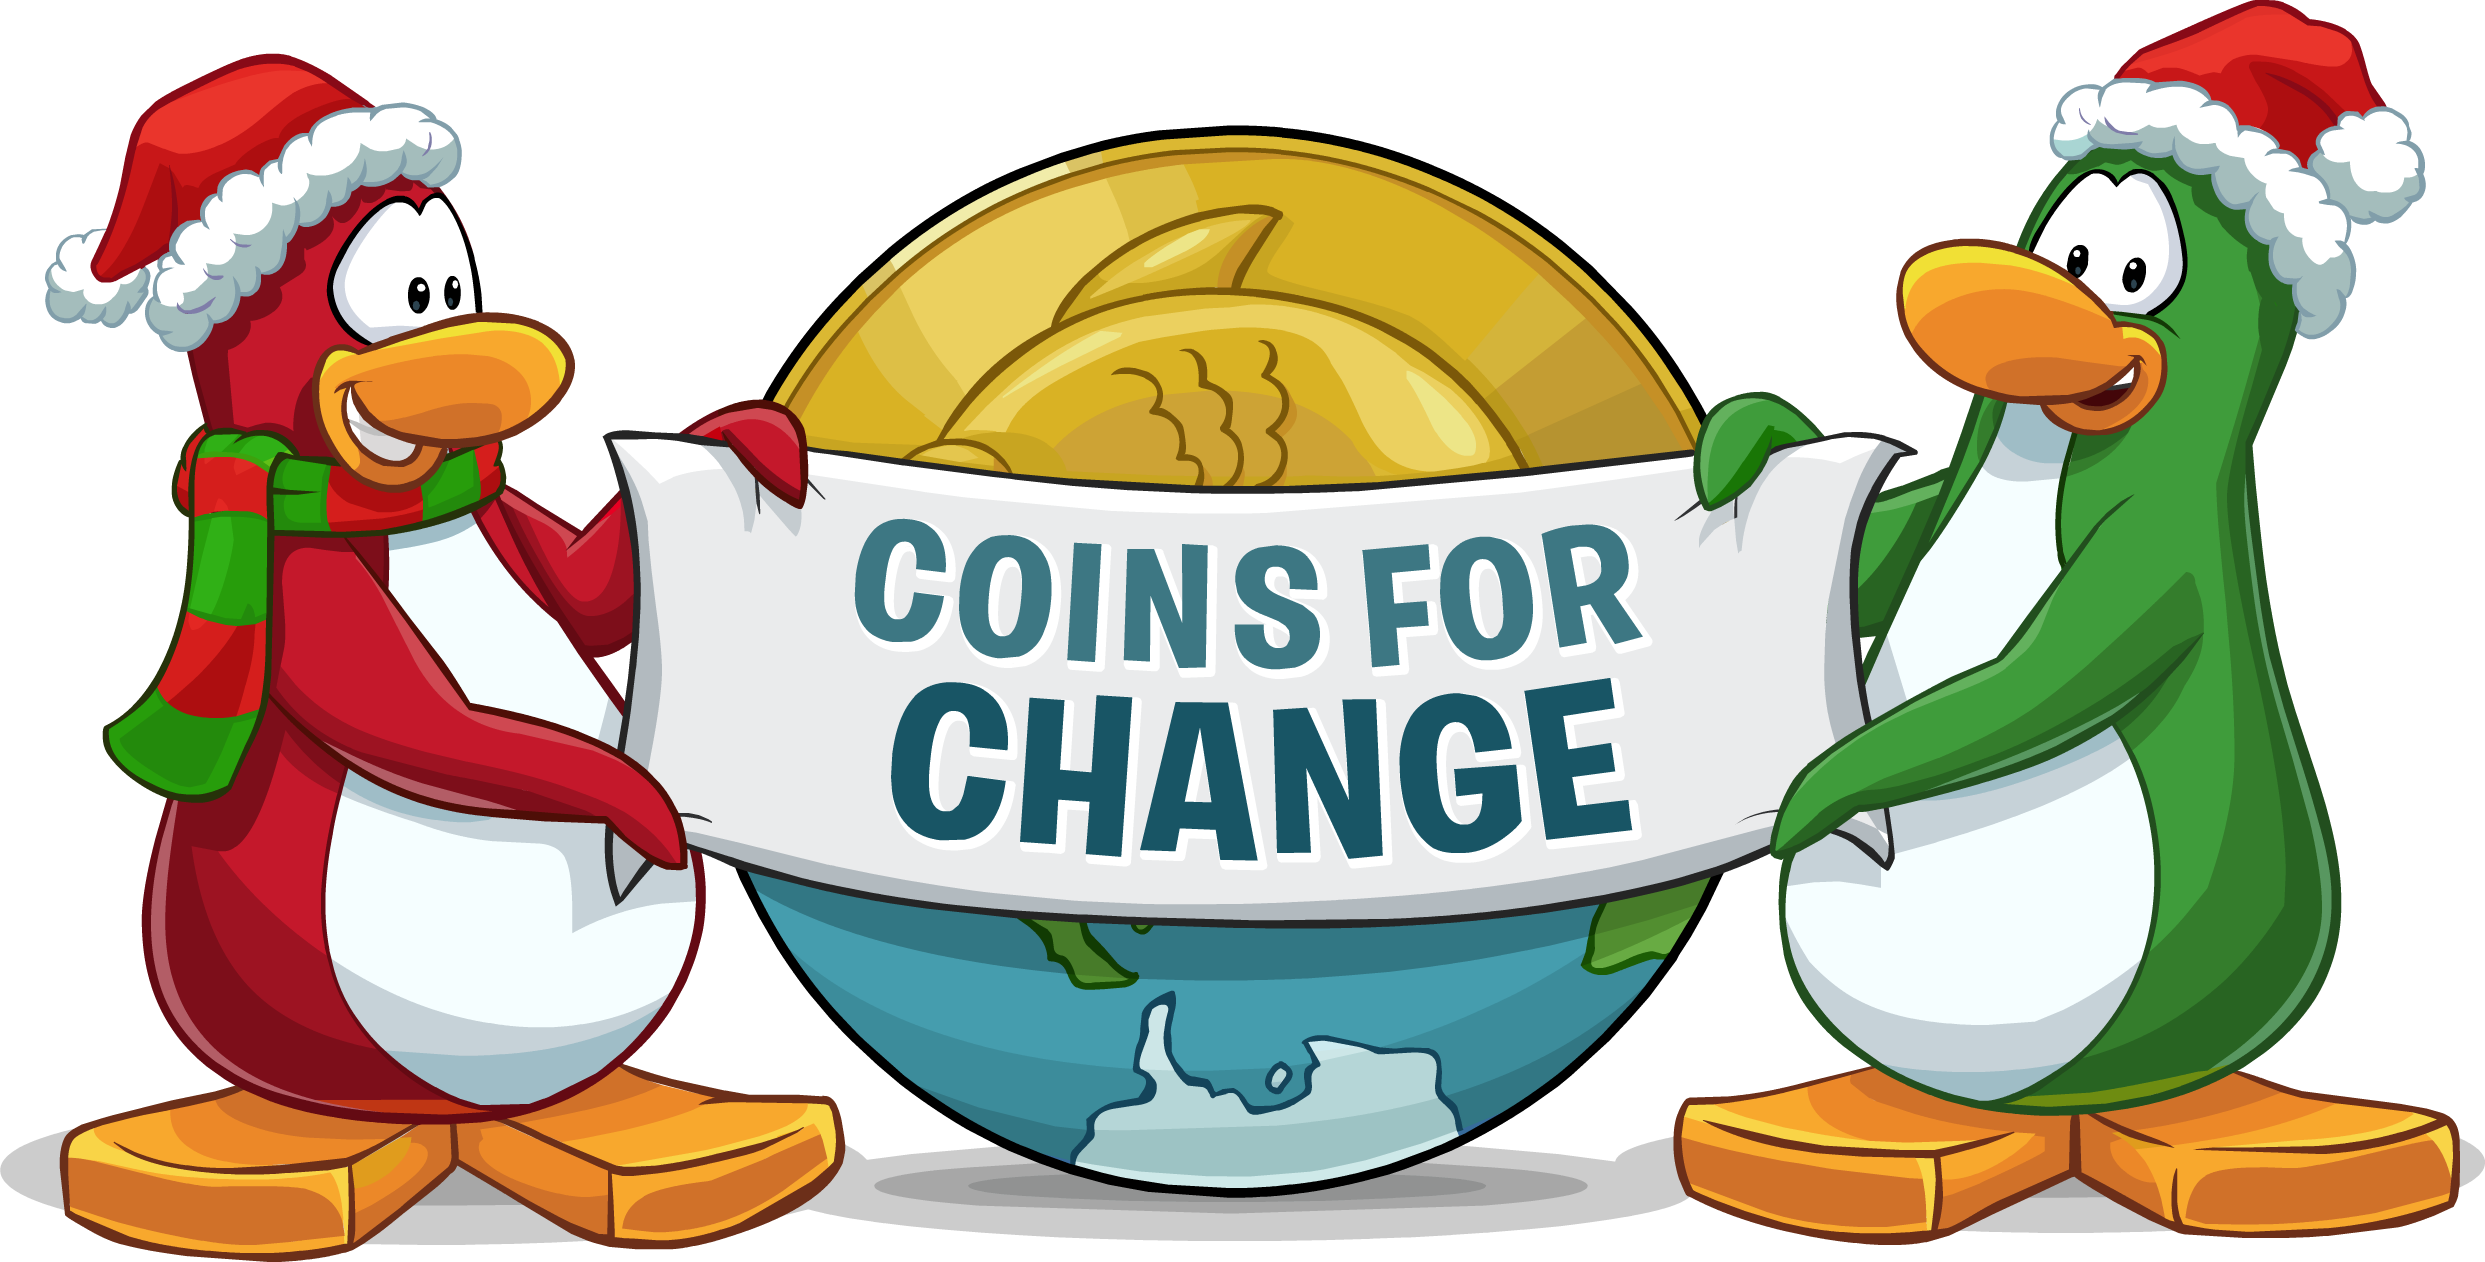 change coins penguin club holiday wish christmas merry puffles wiki walrus donation crystal